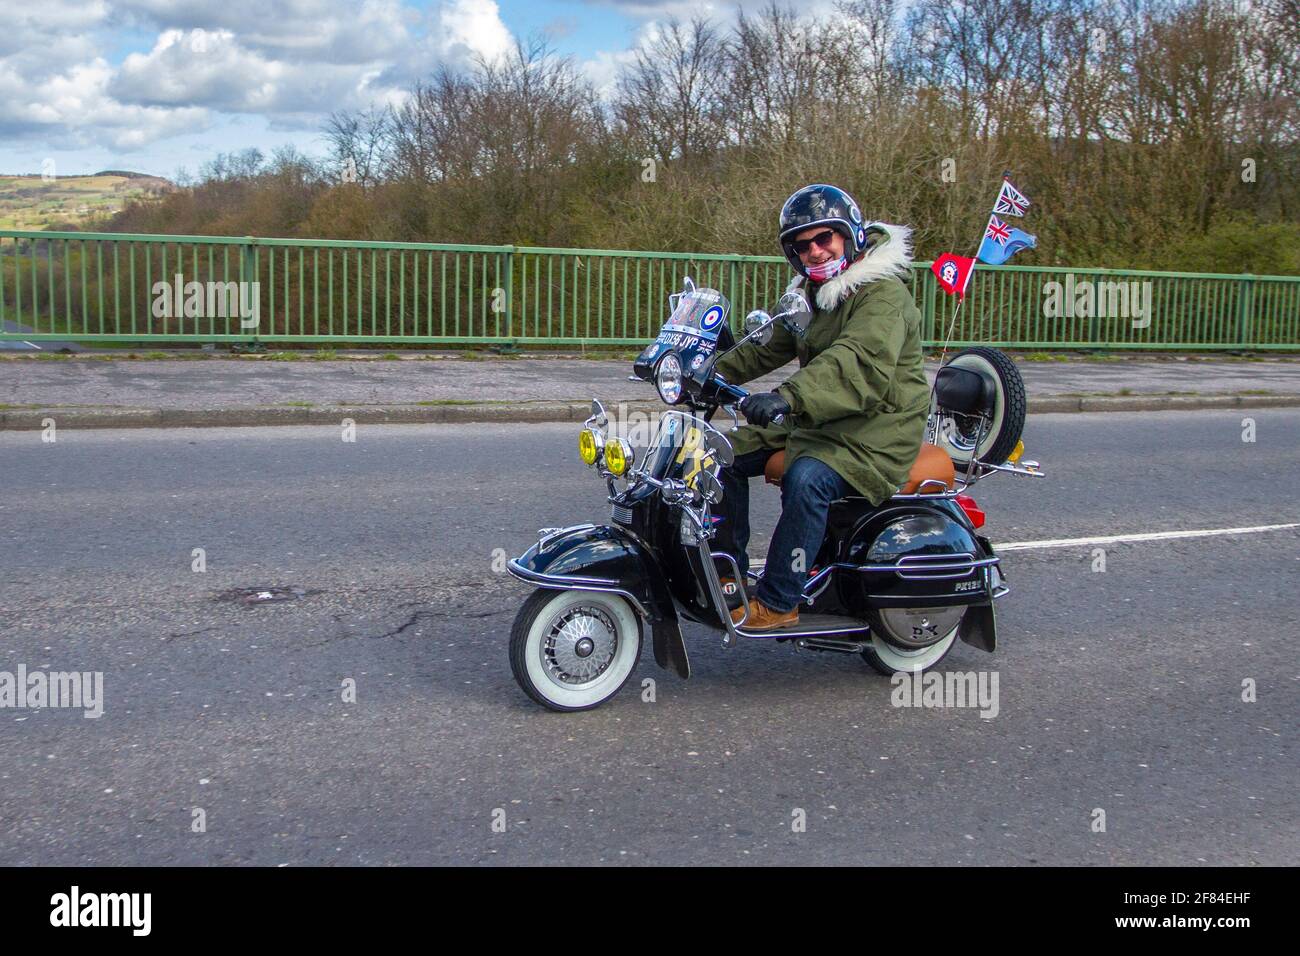 2006 Piaggio Px 125 Vespa 123cc scooter; Motorbike rider; two wheeled  transport, motorcycles, vehicle on British roads, motorbikes, motorcycle  bike riders motoring in Manchester, UK Stock Photo - Alamy